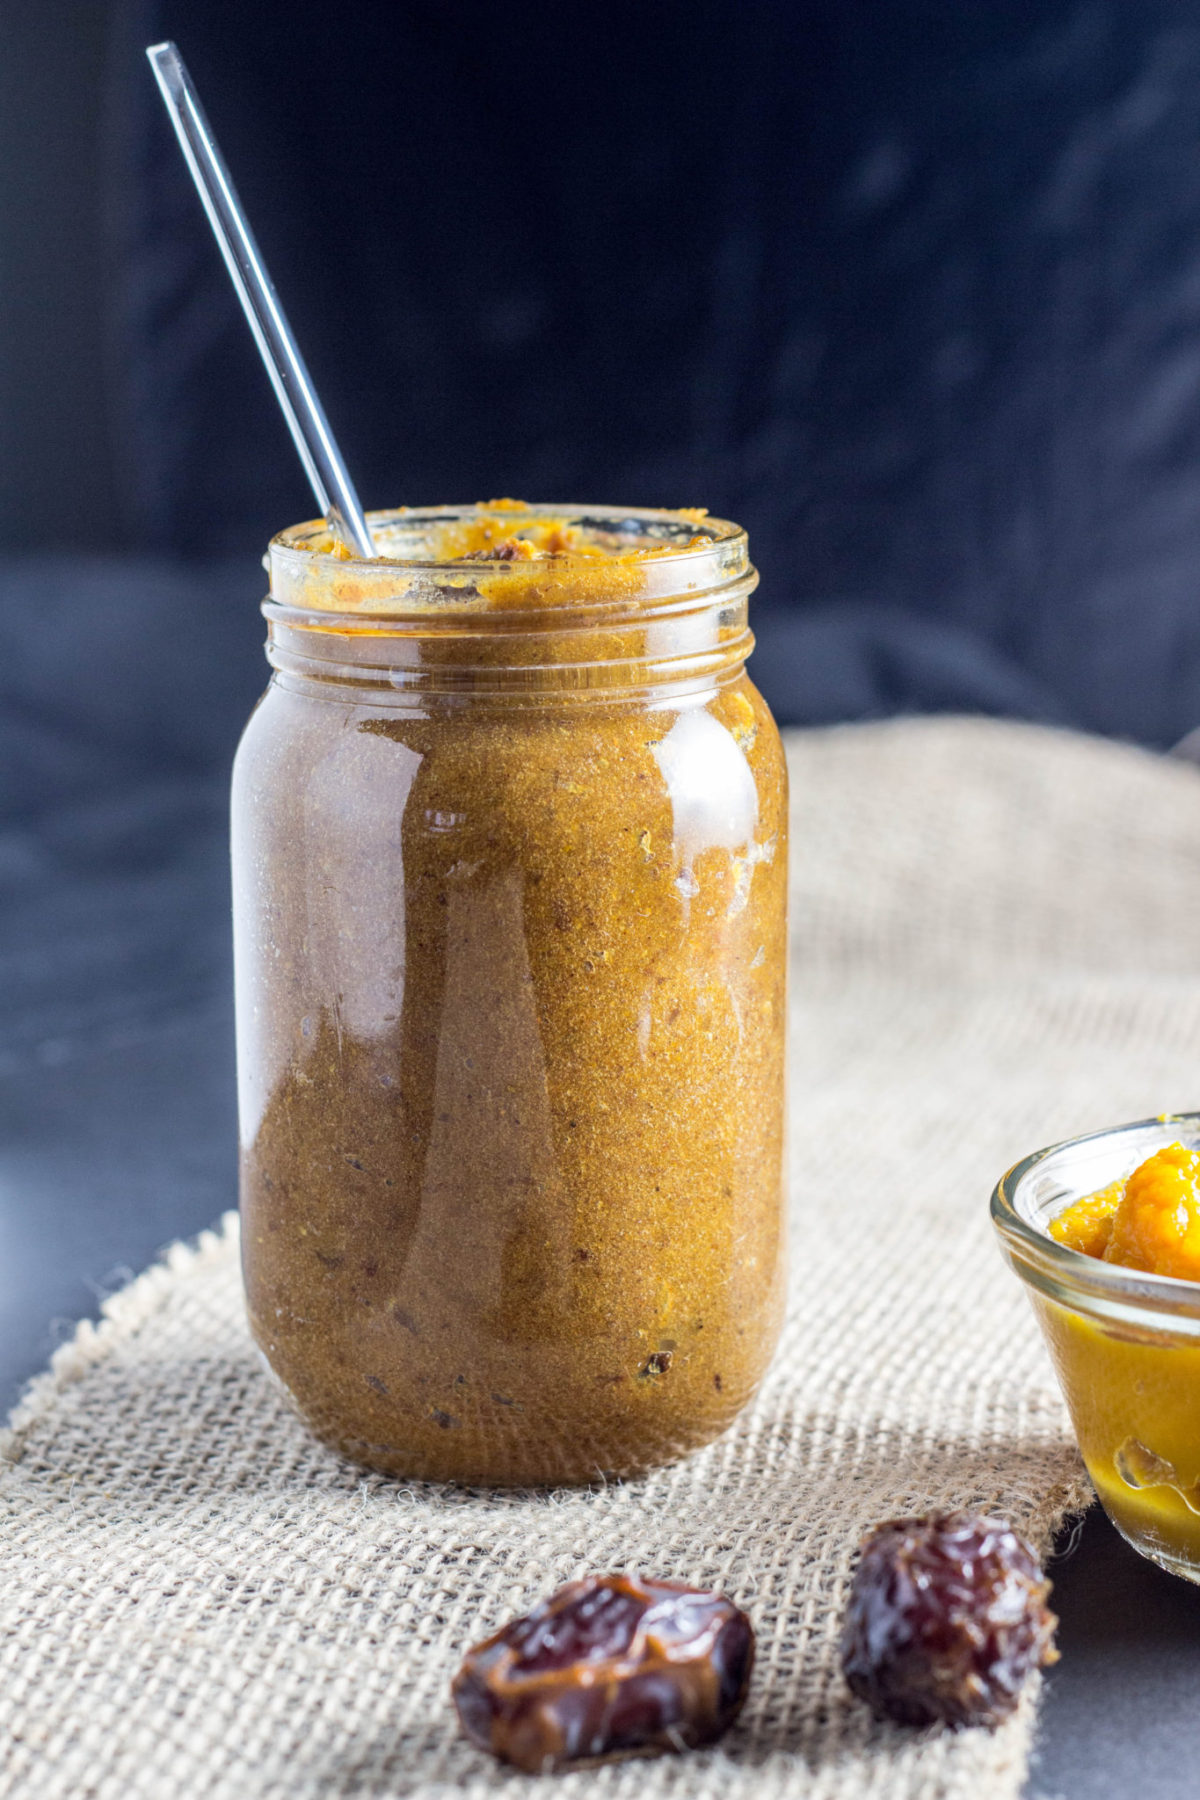 5 Minute Spiced Pumpkin Butter-only requires 3 ingredients and no cook time. Super simple and tastes amazing. No added sugar, vegan, and gluten free.